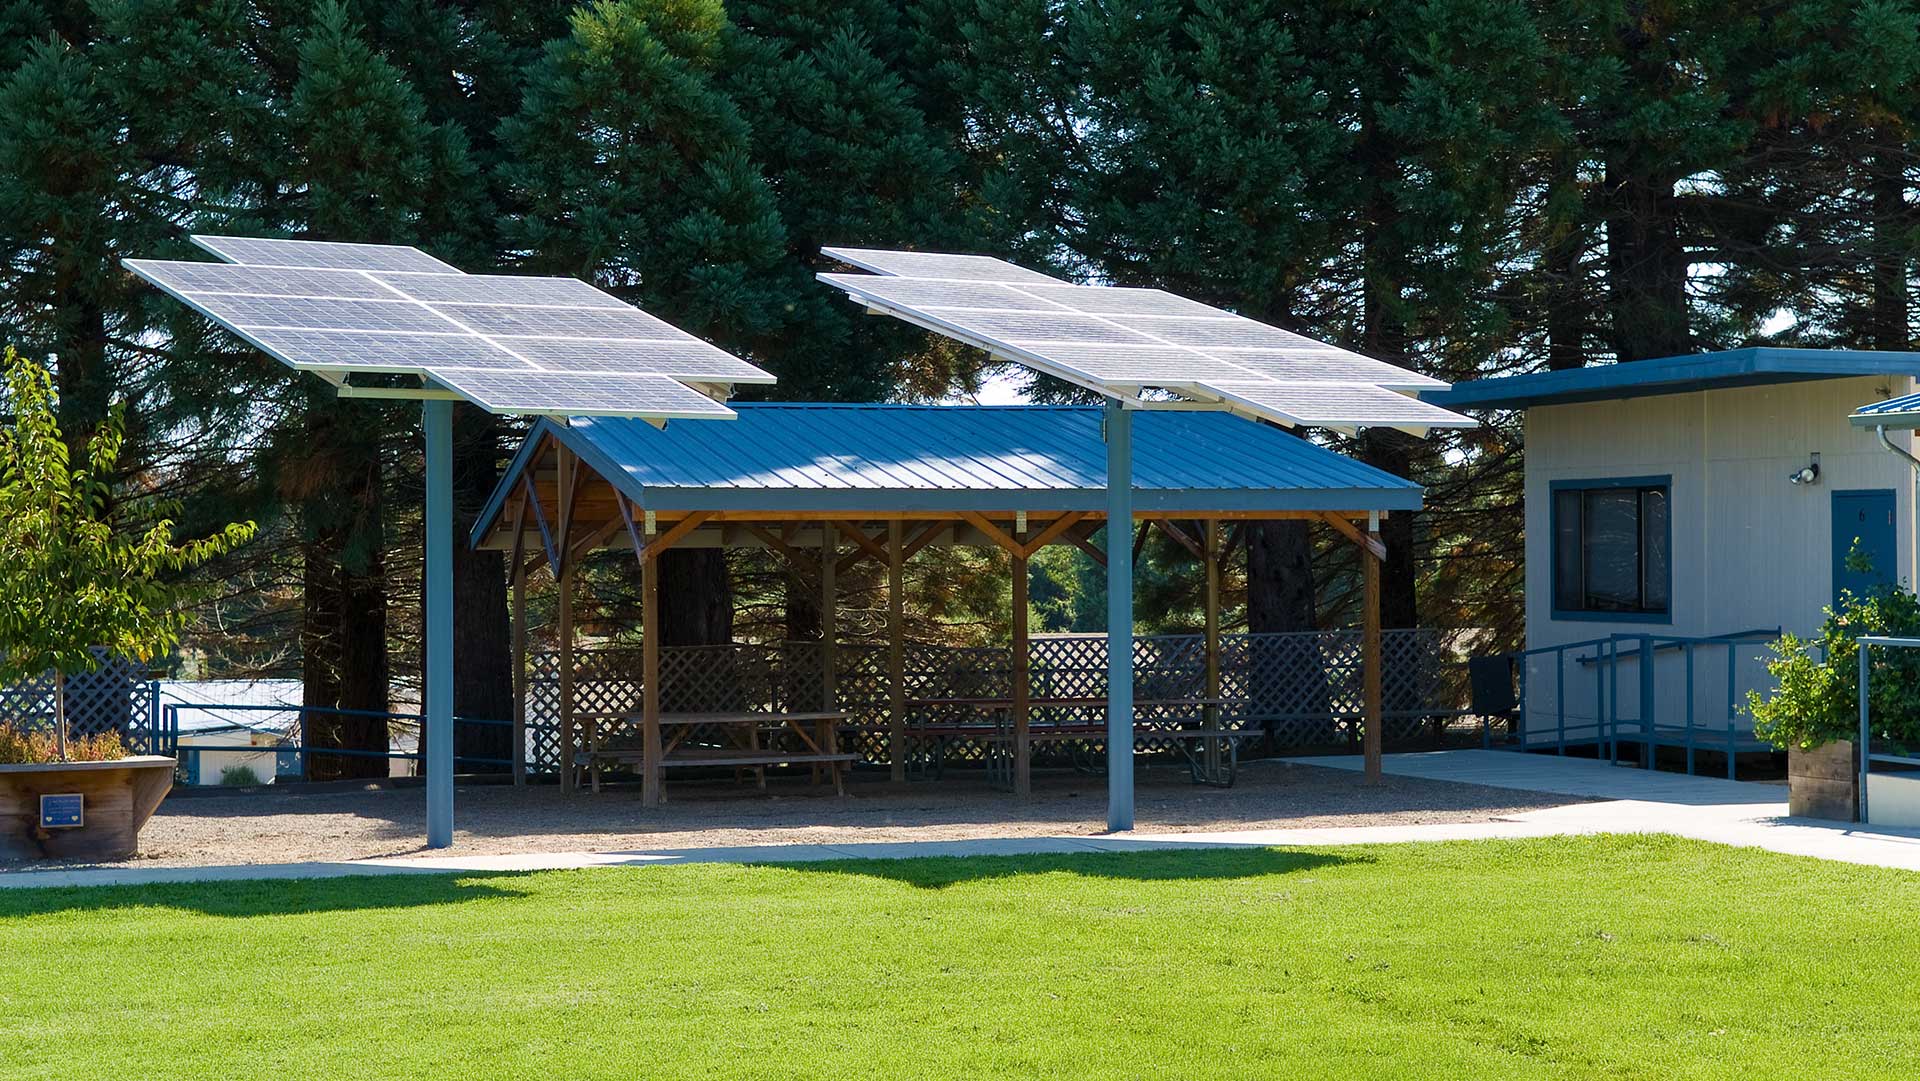 Individual solar panels on single posts, assembly resembling large flowers. Redwood trees and seating area behind.